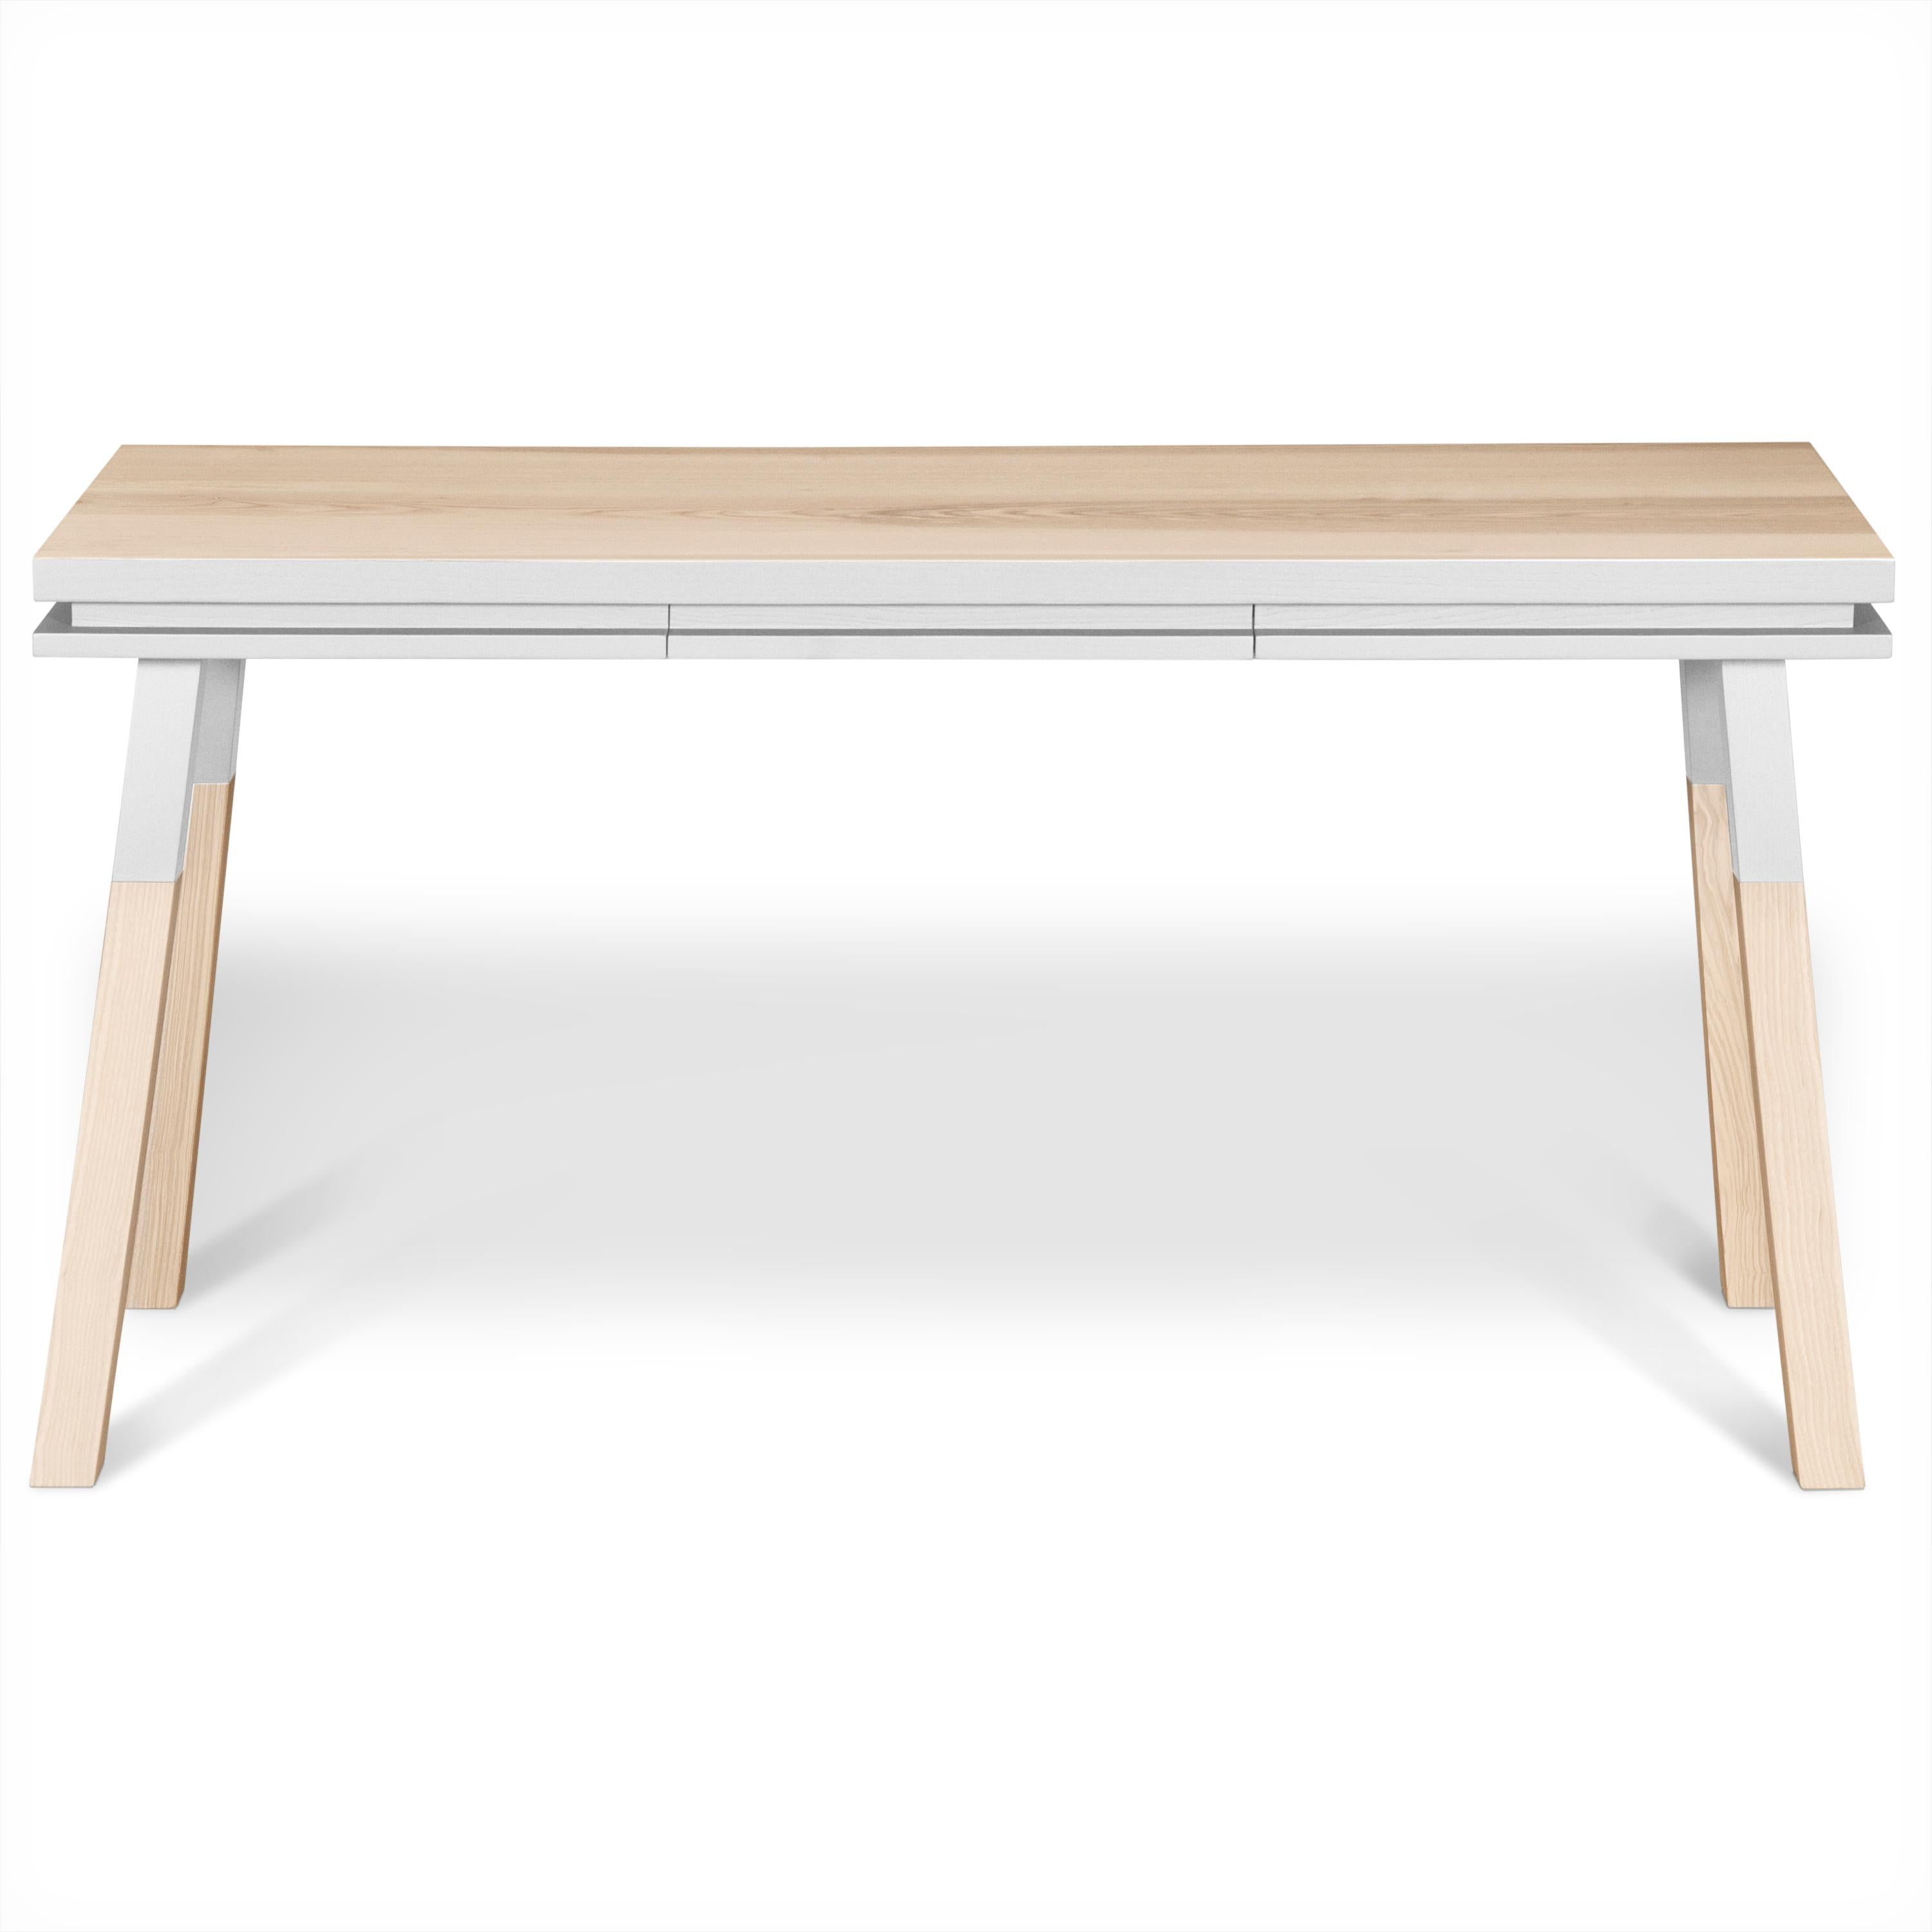 White writing table in solid wood, design by Eric Gizard, Paris - French craft  For Sale 1